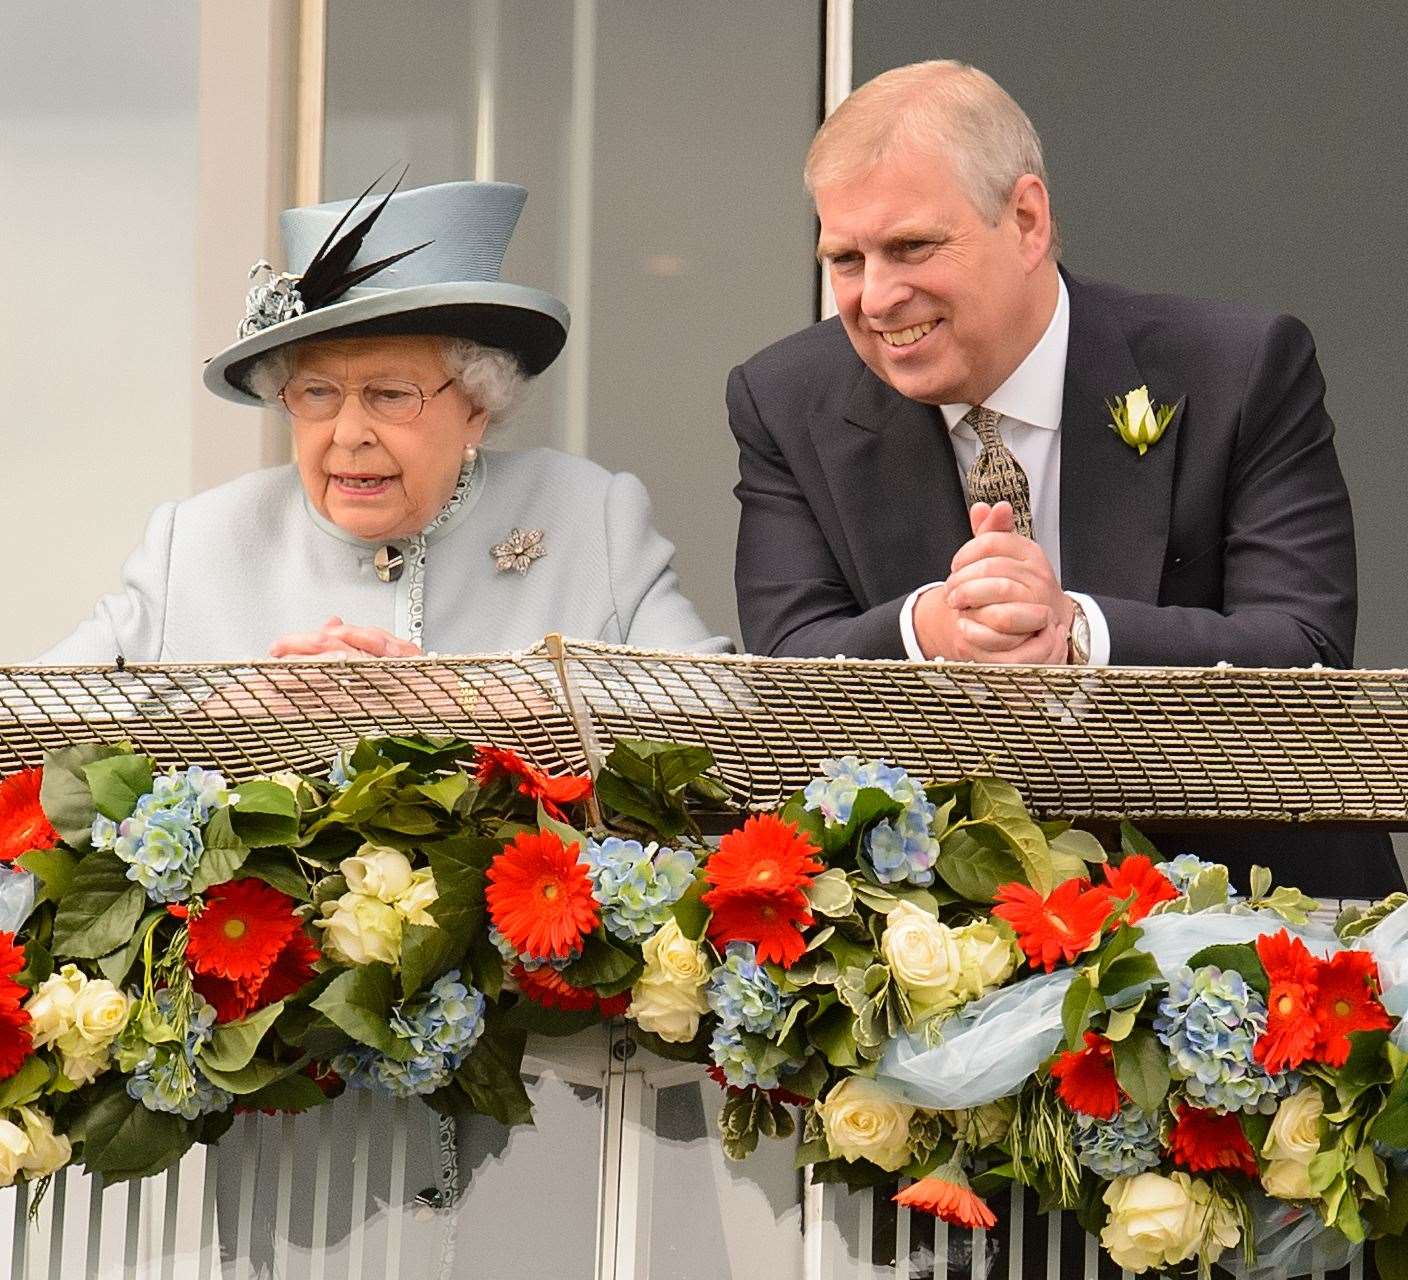 The Queen and the Duke of York at the Epsom Derby 2013 (Dominic Lipinski/PA)